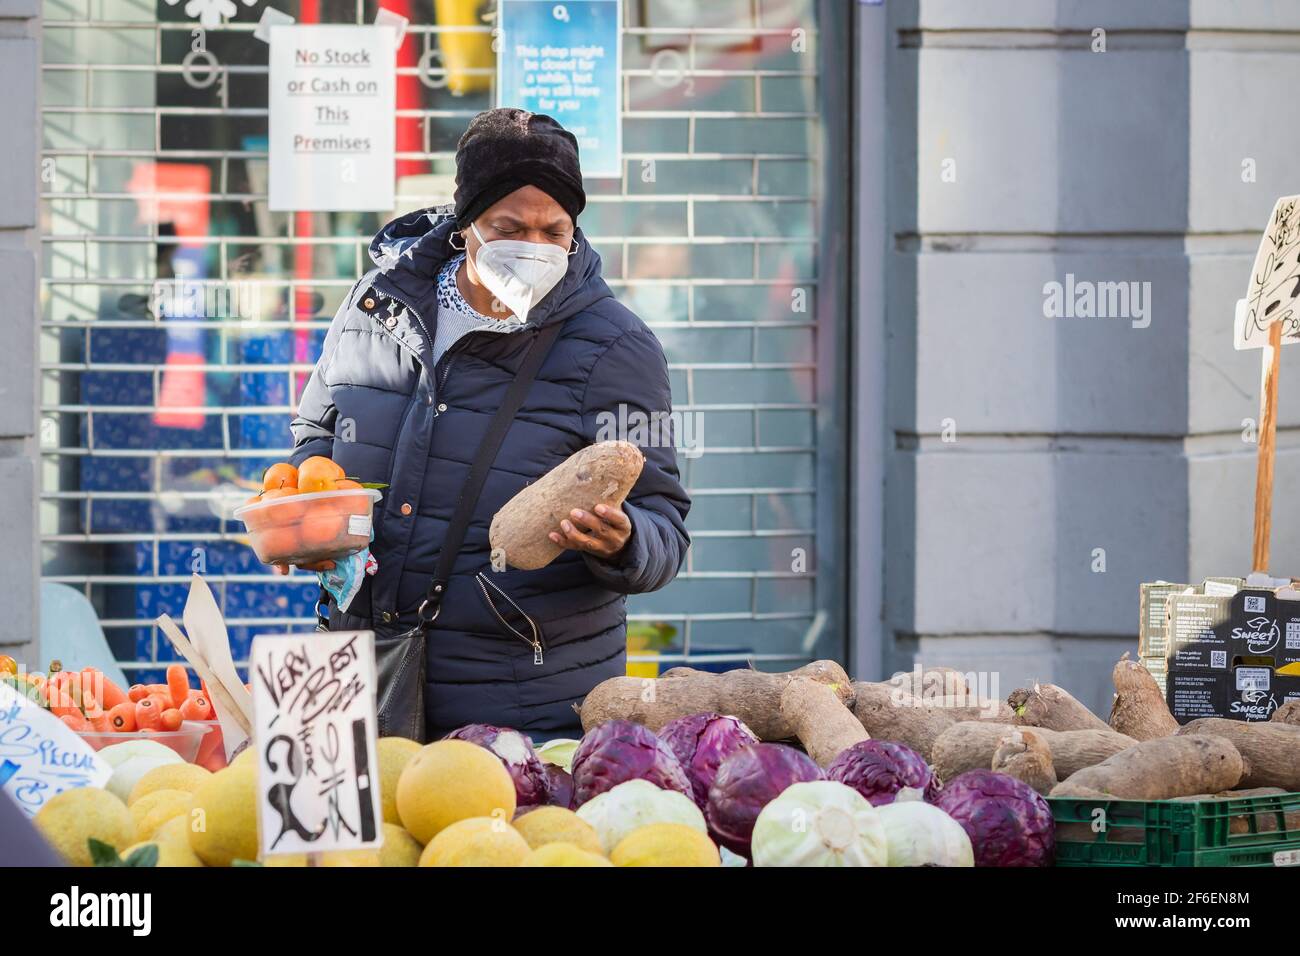 London, UK - 5 February, 2021 - A black woman wearing a protective face mask while shopping at an outdoor produce stall on Wood Green high street Stock Photo